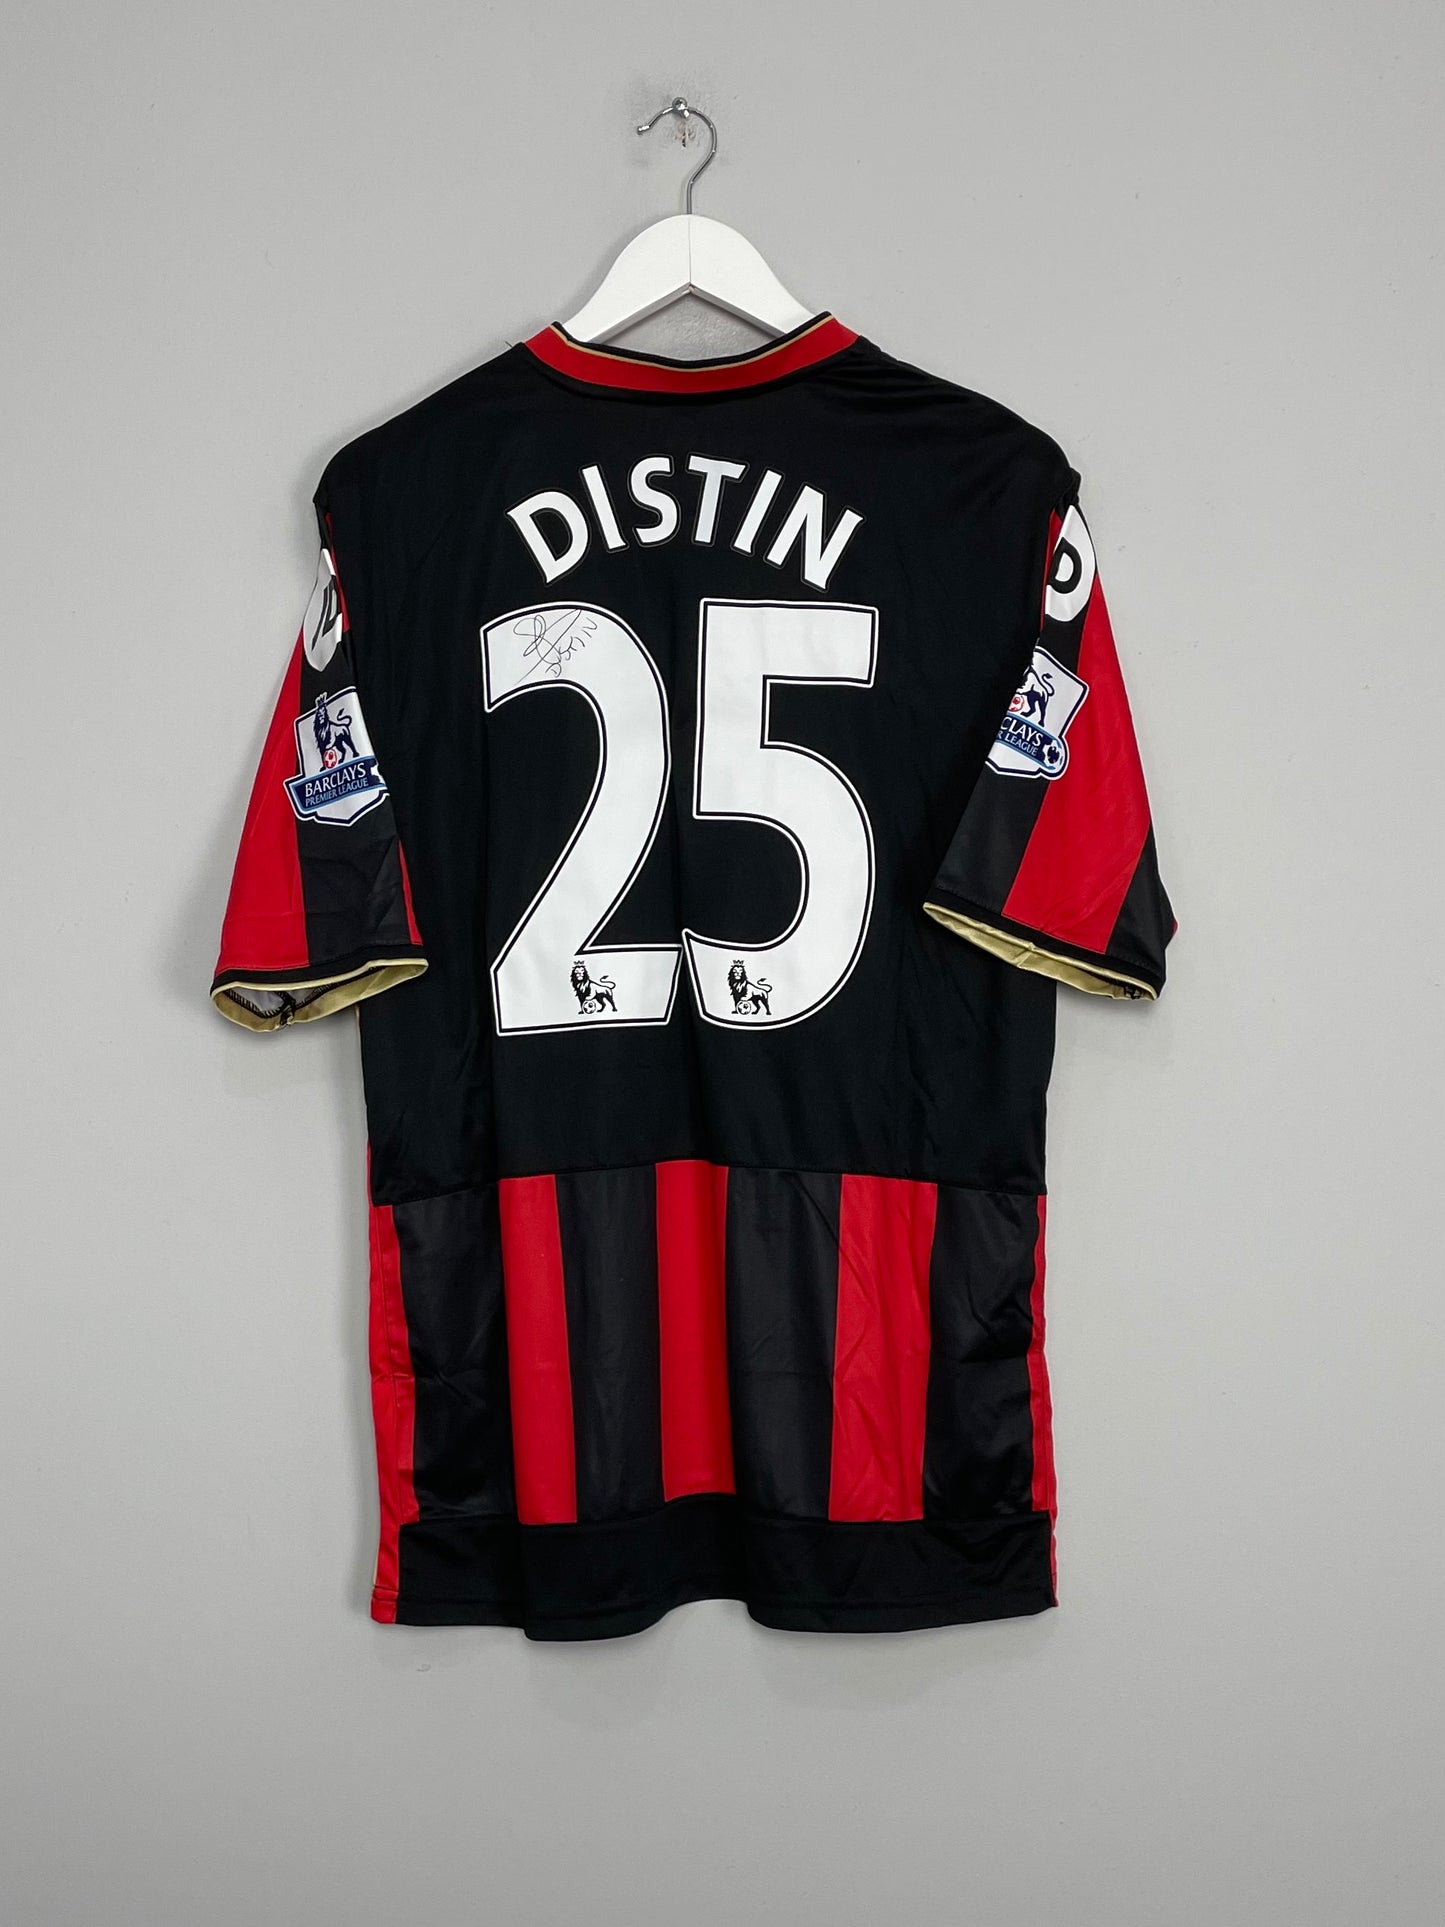 2015/16 BOURNEMOUTH DISTIN #25 *MATCH ISSUED + SIGNED* HOME SHIRT (L) JD